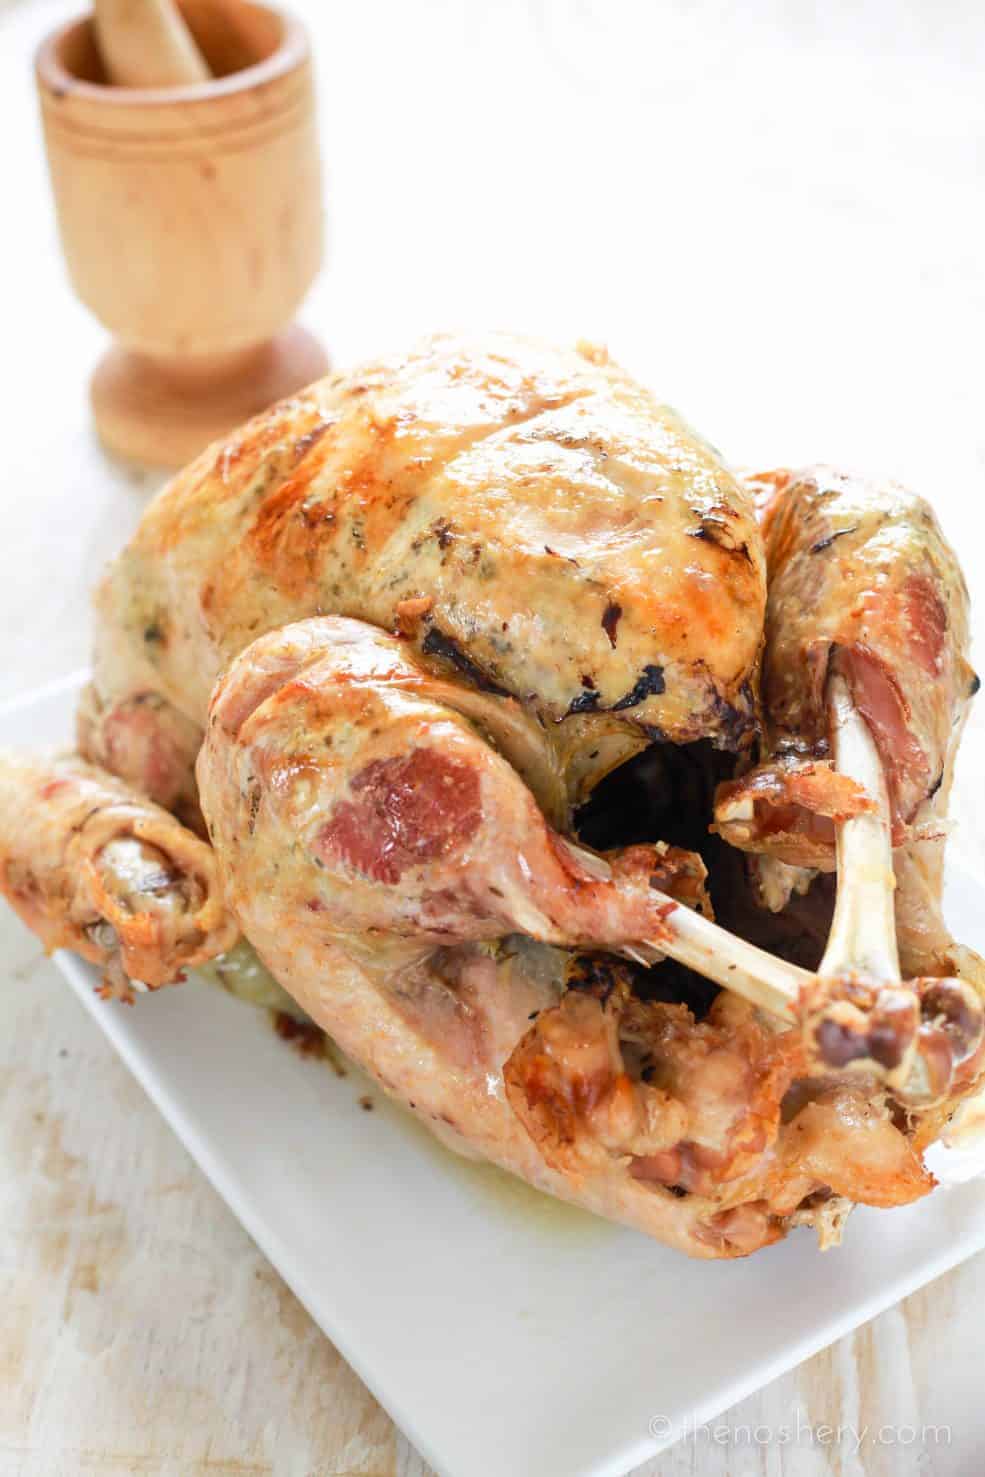 Puerto Rican Thanksgiving Turkey: Pavochon - Turkey seasoned to tasted like pork. Roasted breast down for a fool proof juicy and flavorful breast. | TheNoshery.com